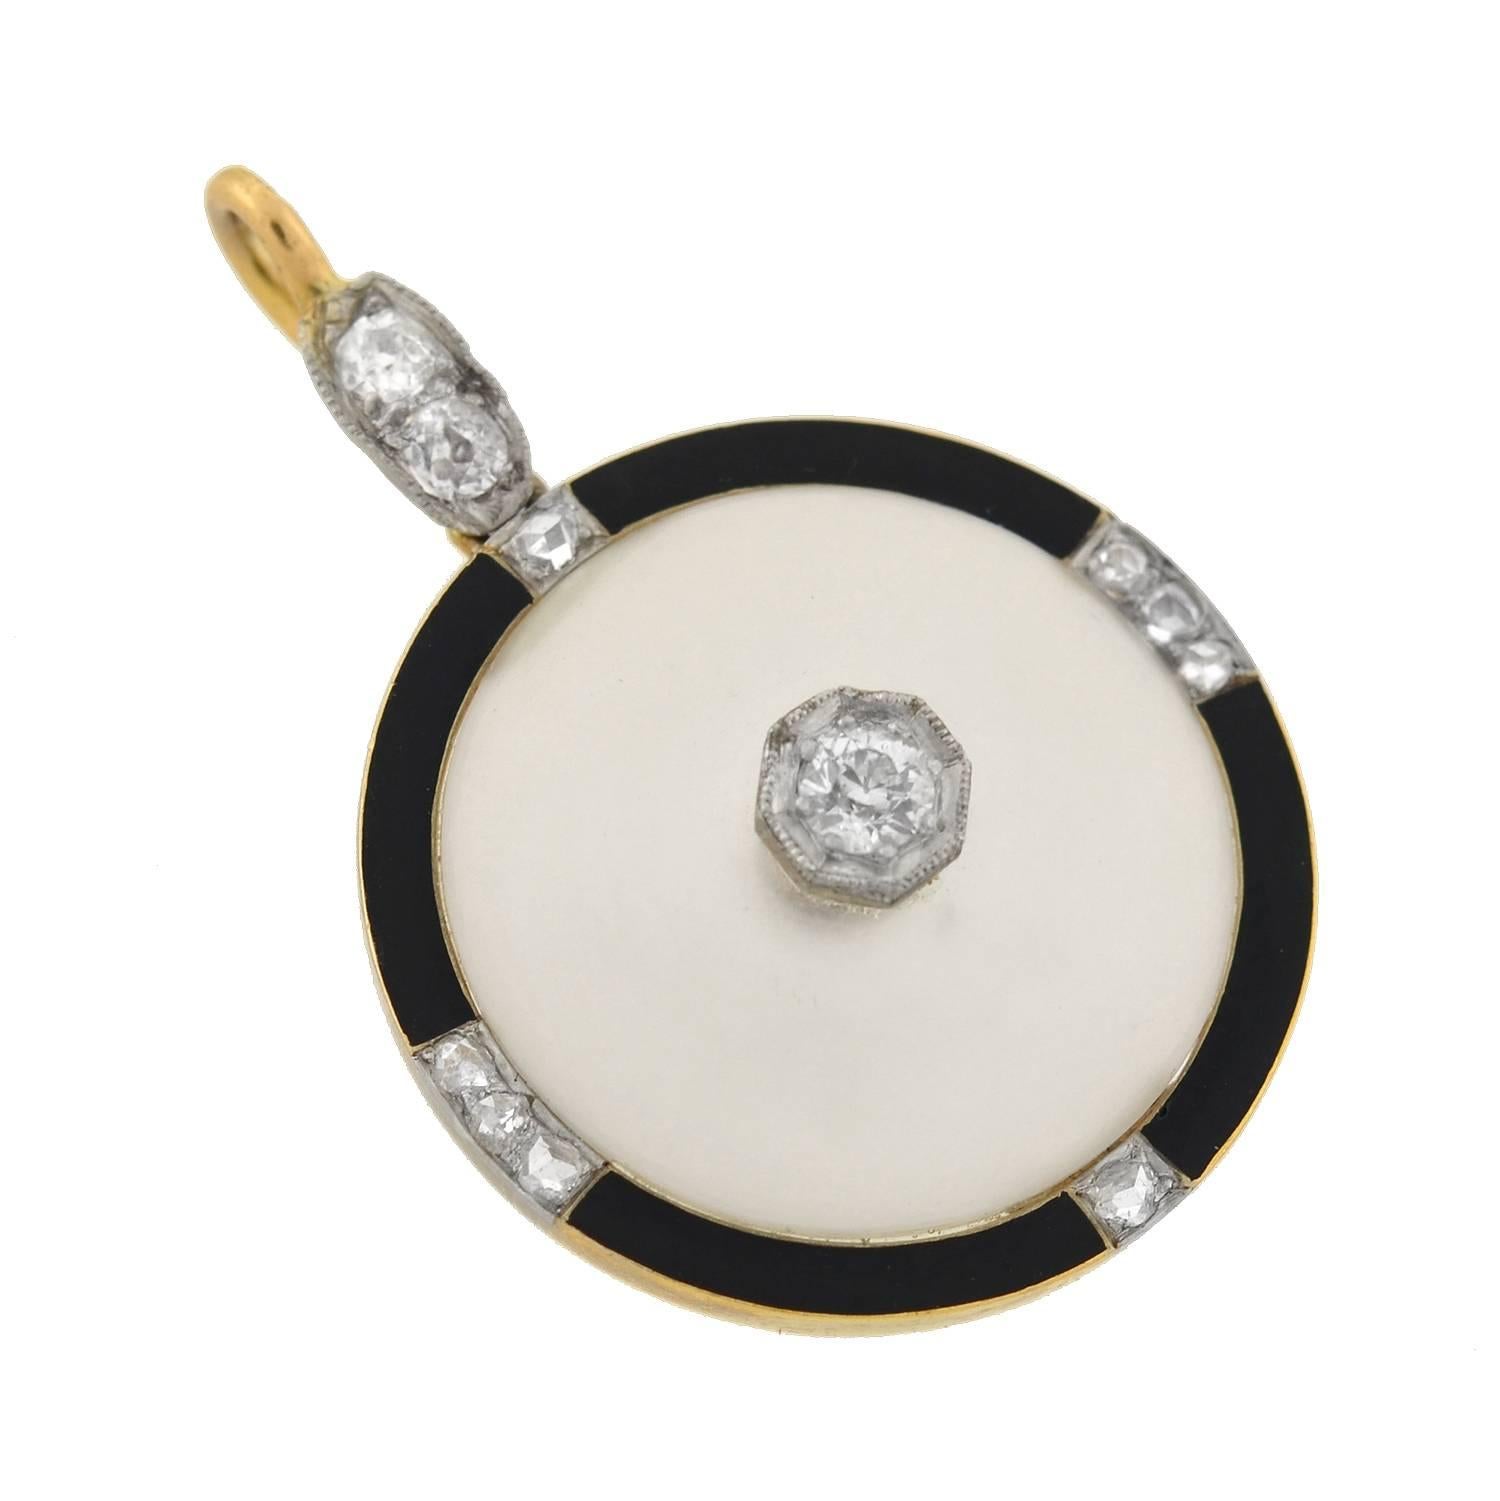 A very striking pendant from the Art Deco (ca1920) era! This beautiful pendant is crafted in 14kt gold with platinum accents. The piece is comprised of a frosted rock quartz crystal plaque, which rests within a circular bezel frame. Decorating the